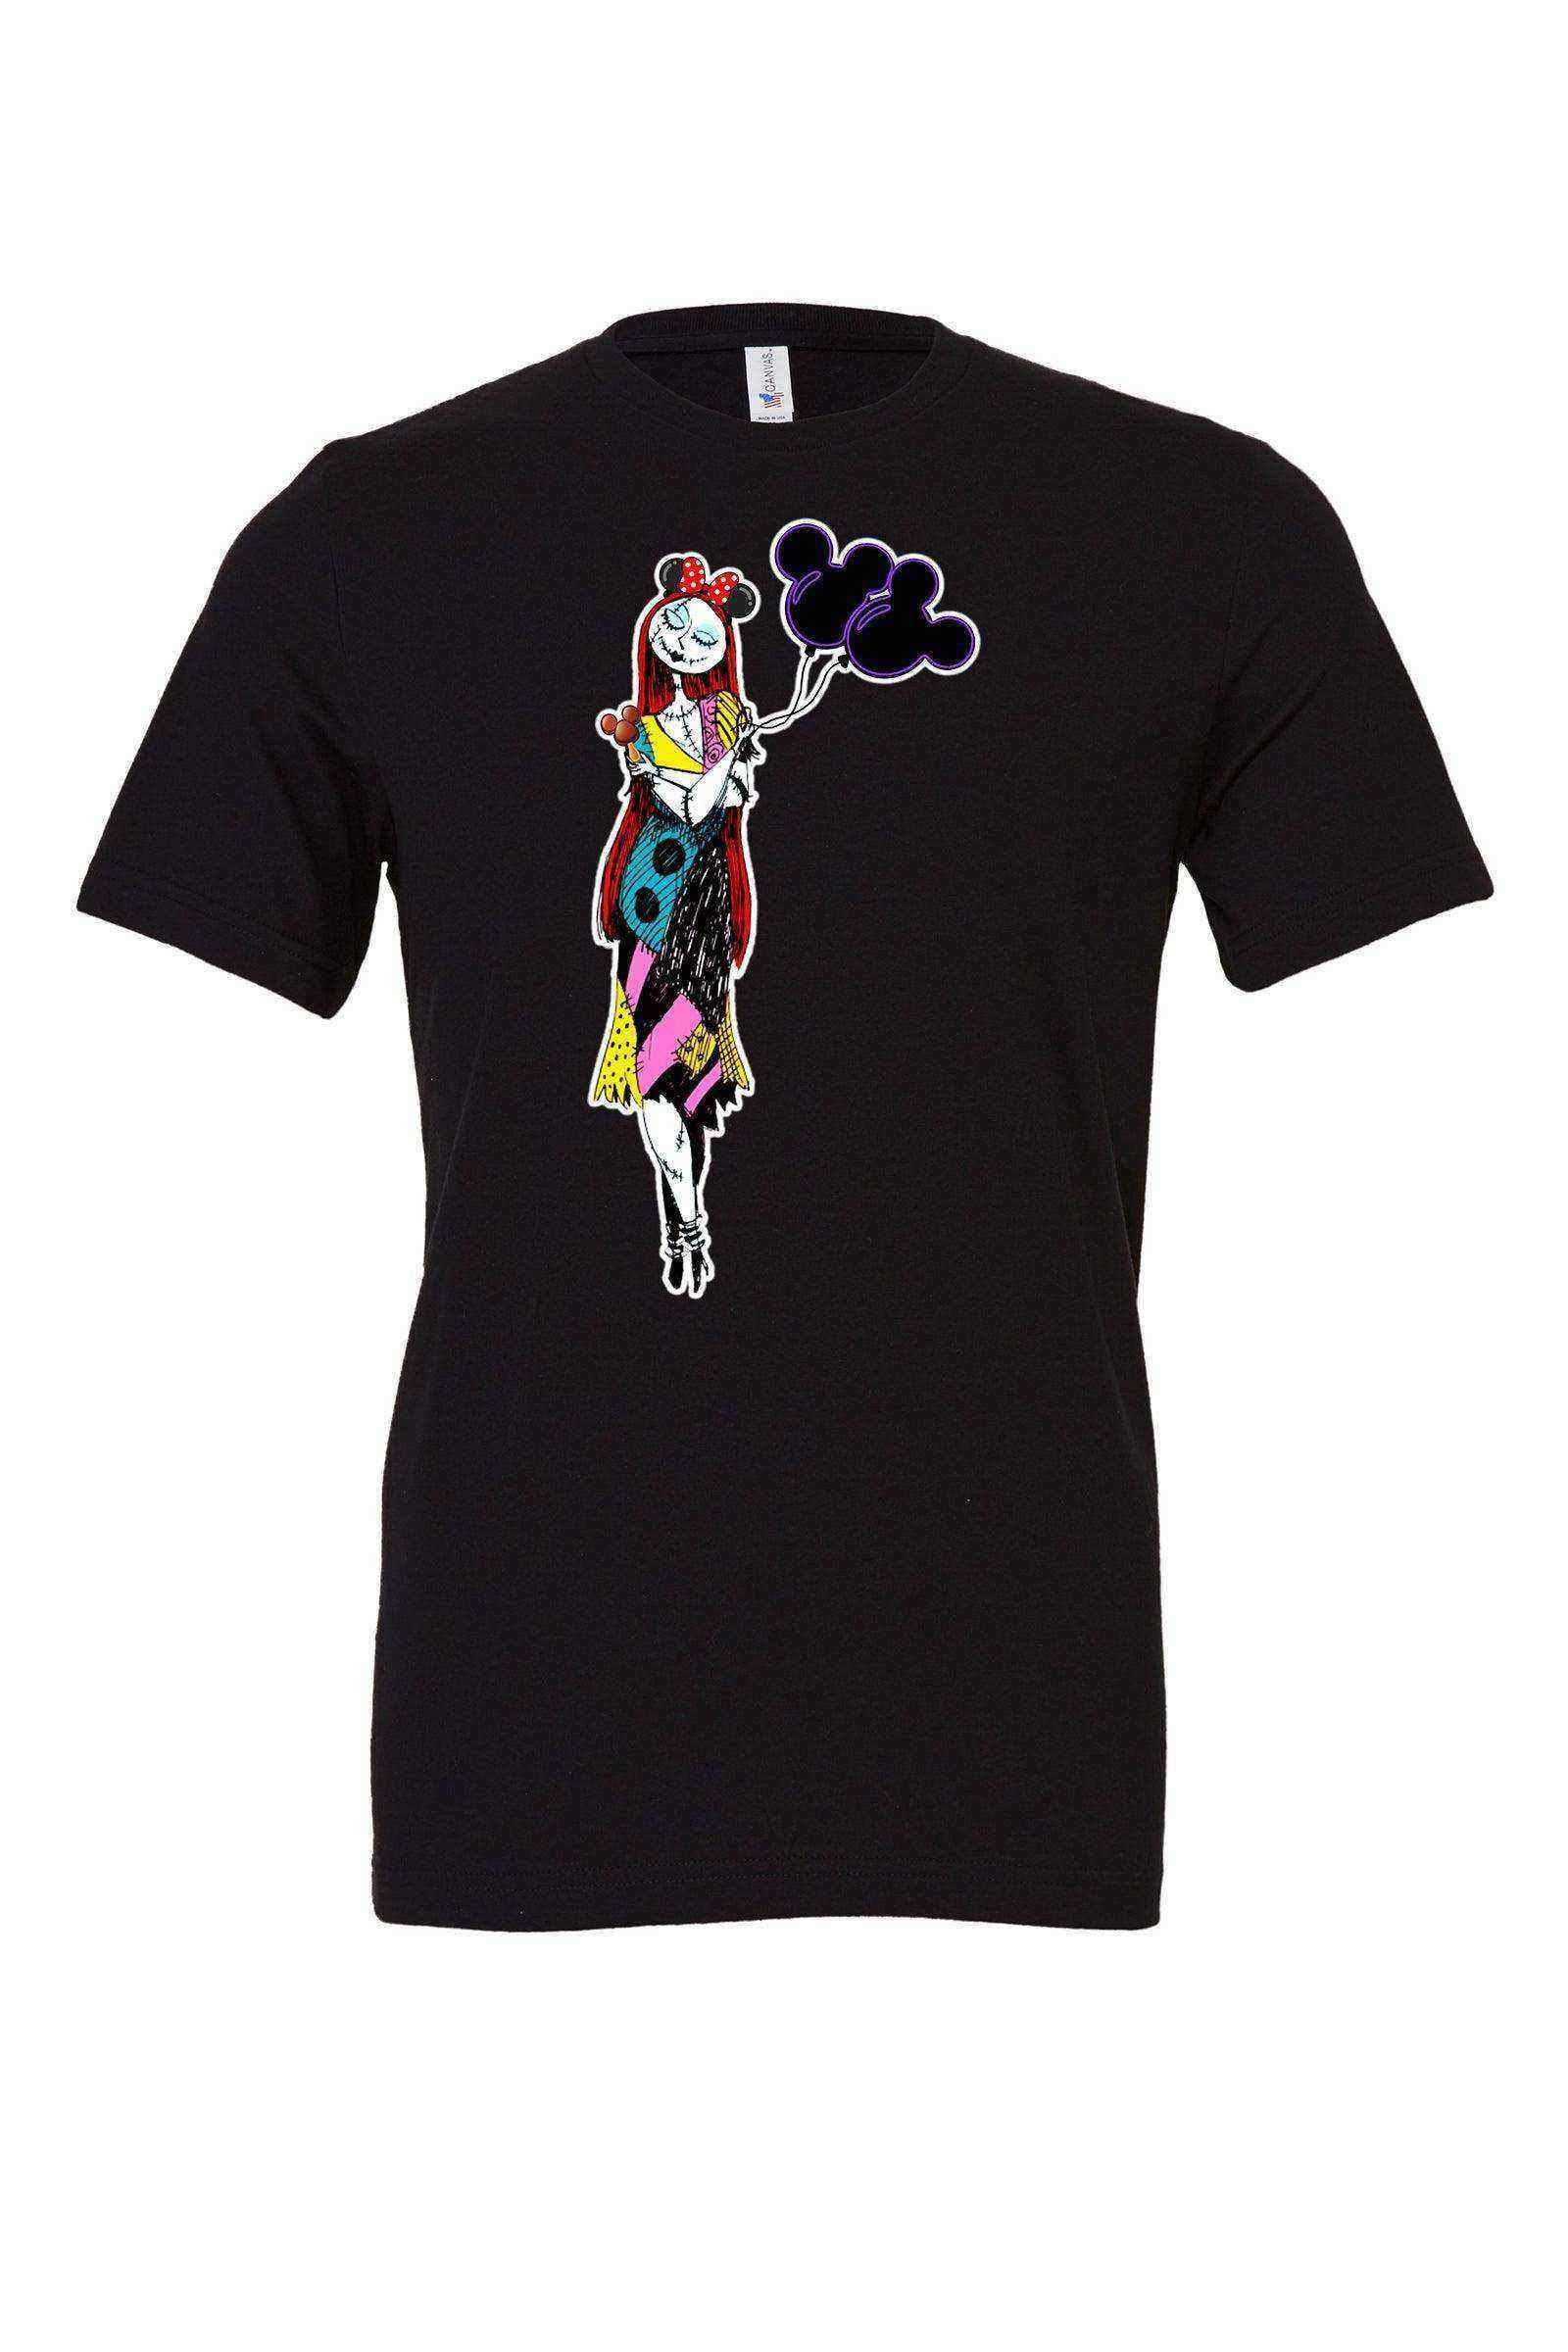 Toddler | Park Hopping Sally Shirt | Nightmare Before Christmas - Dylan's Tees